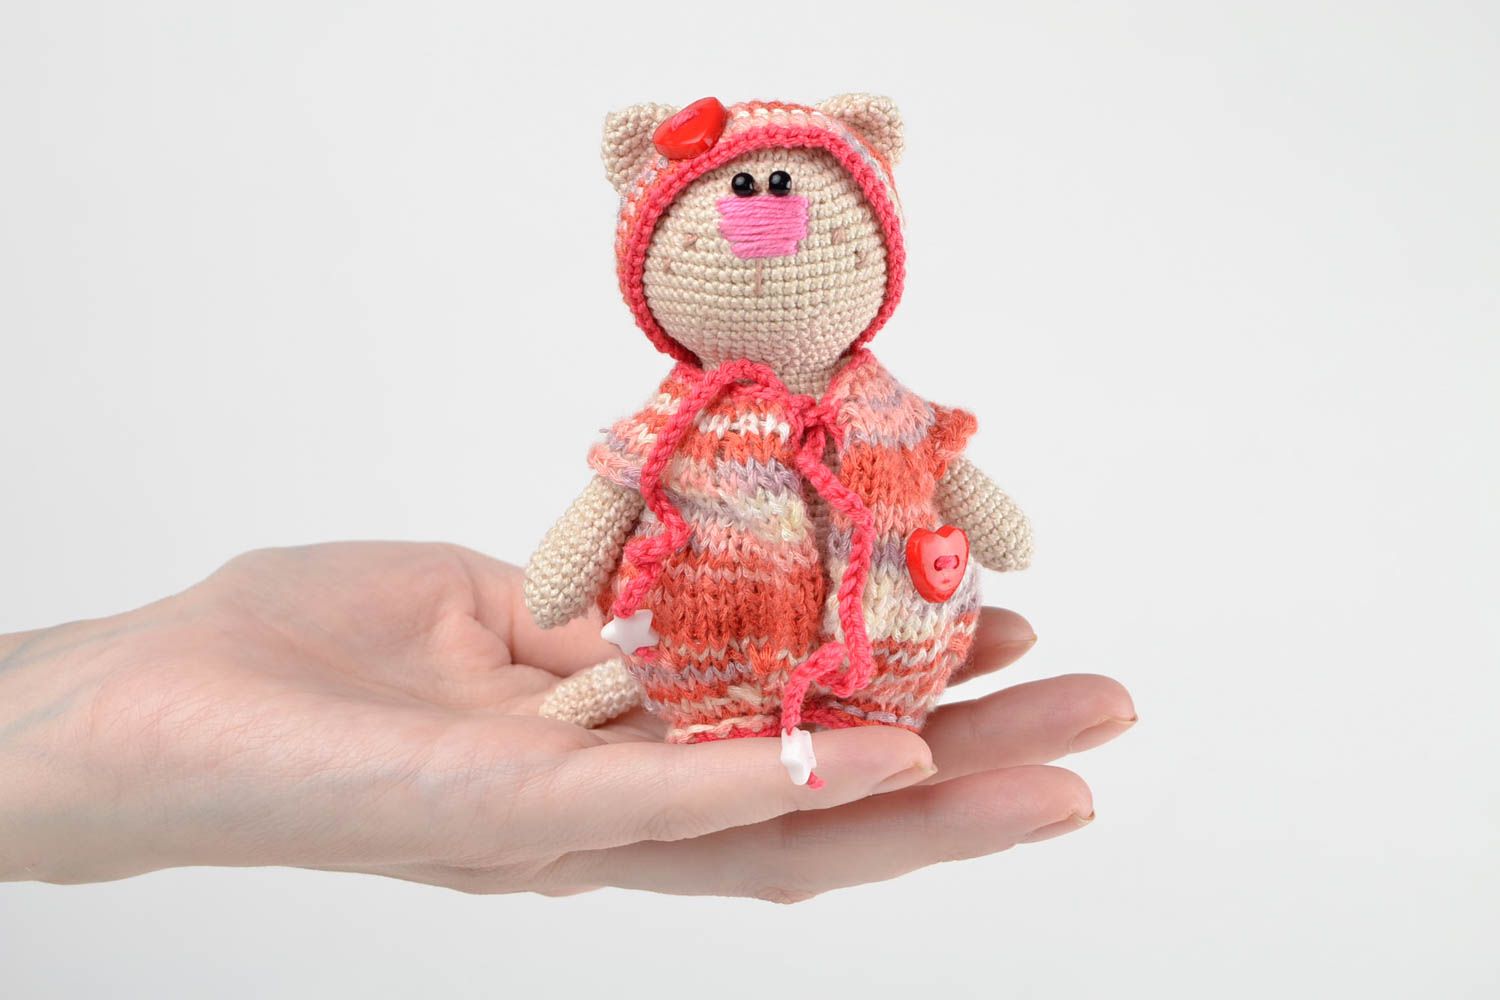 Handmade toy designer toy unusual toys for kids soft toy gift ideas crochet toy photo 2